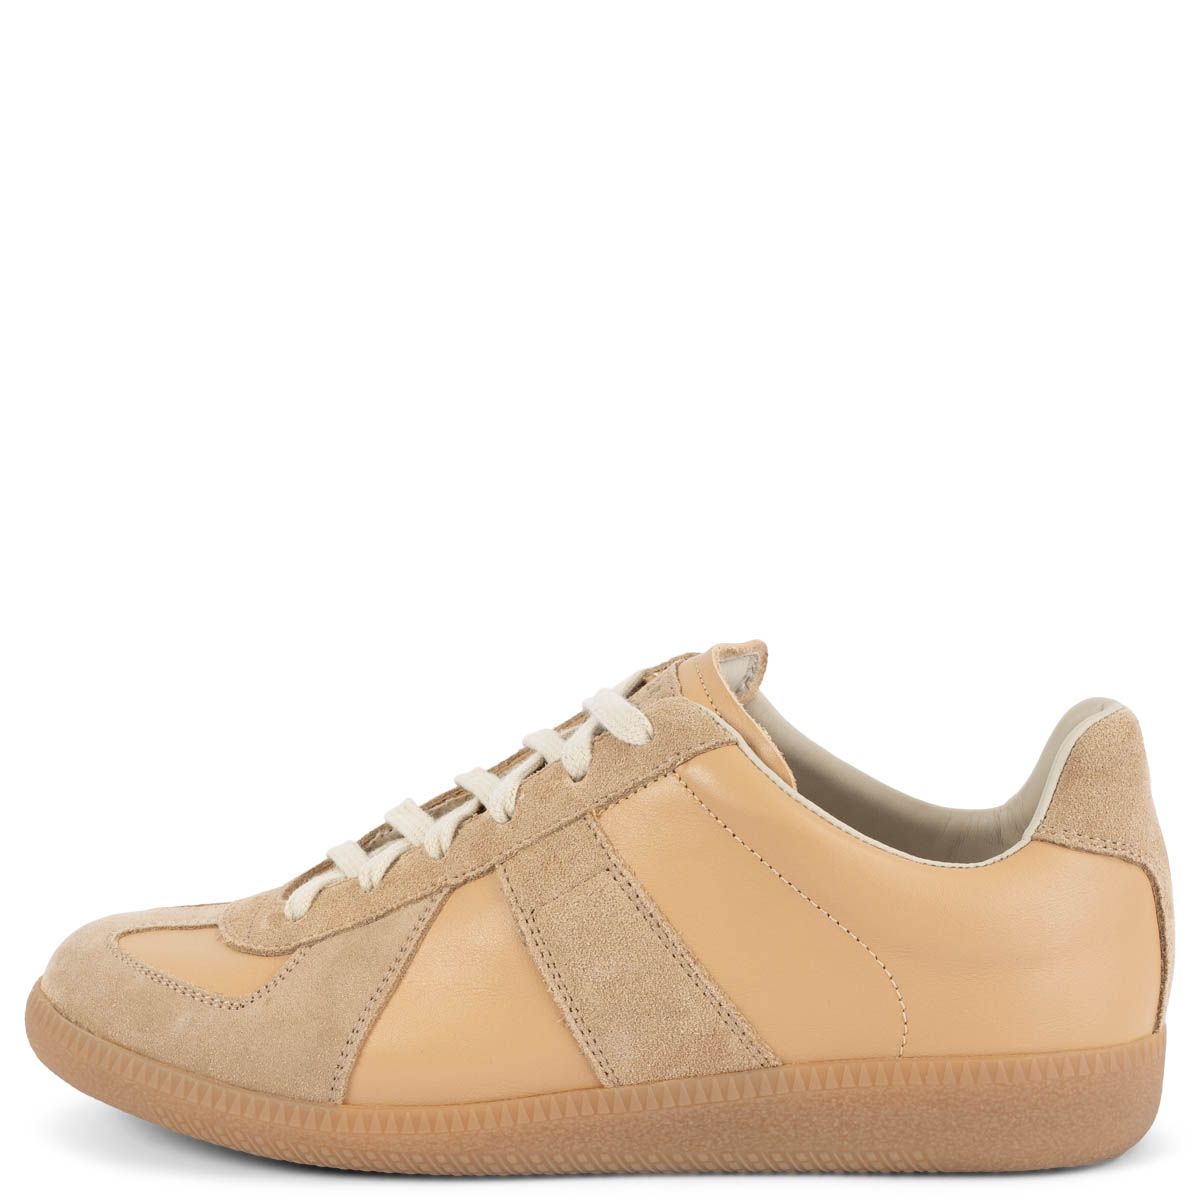 Maison Martin Margiela Replica Sneakers 38 Beige Leather Taupe Suede